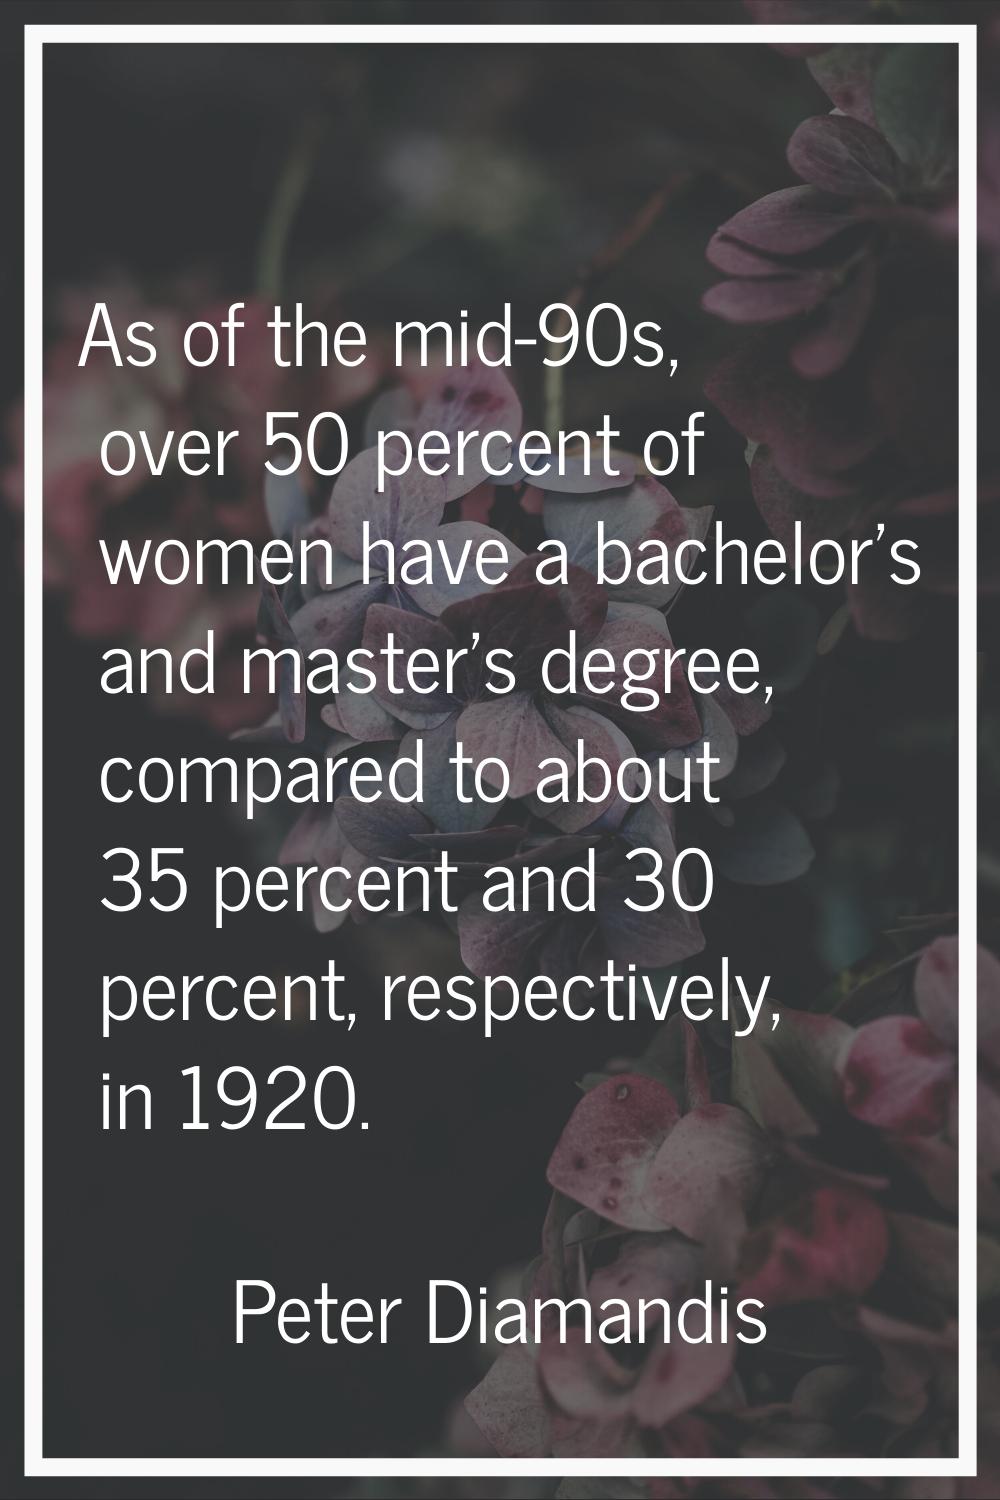 As of the mid-90s, over 50 percent of women have a bachelor's and master's degree, compared to abou